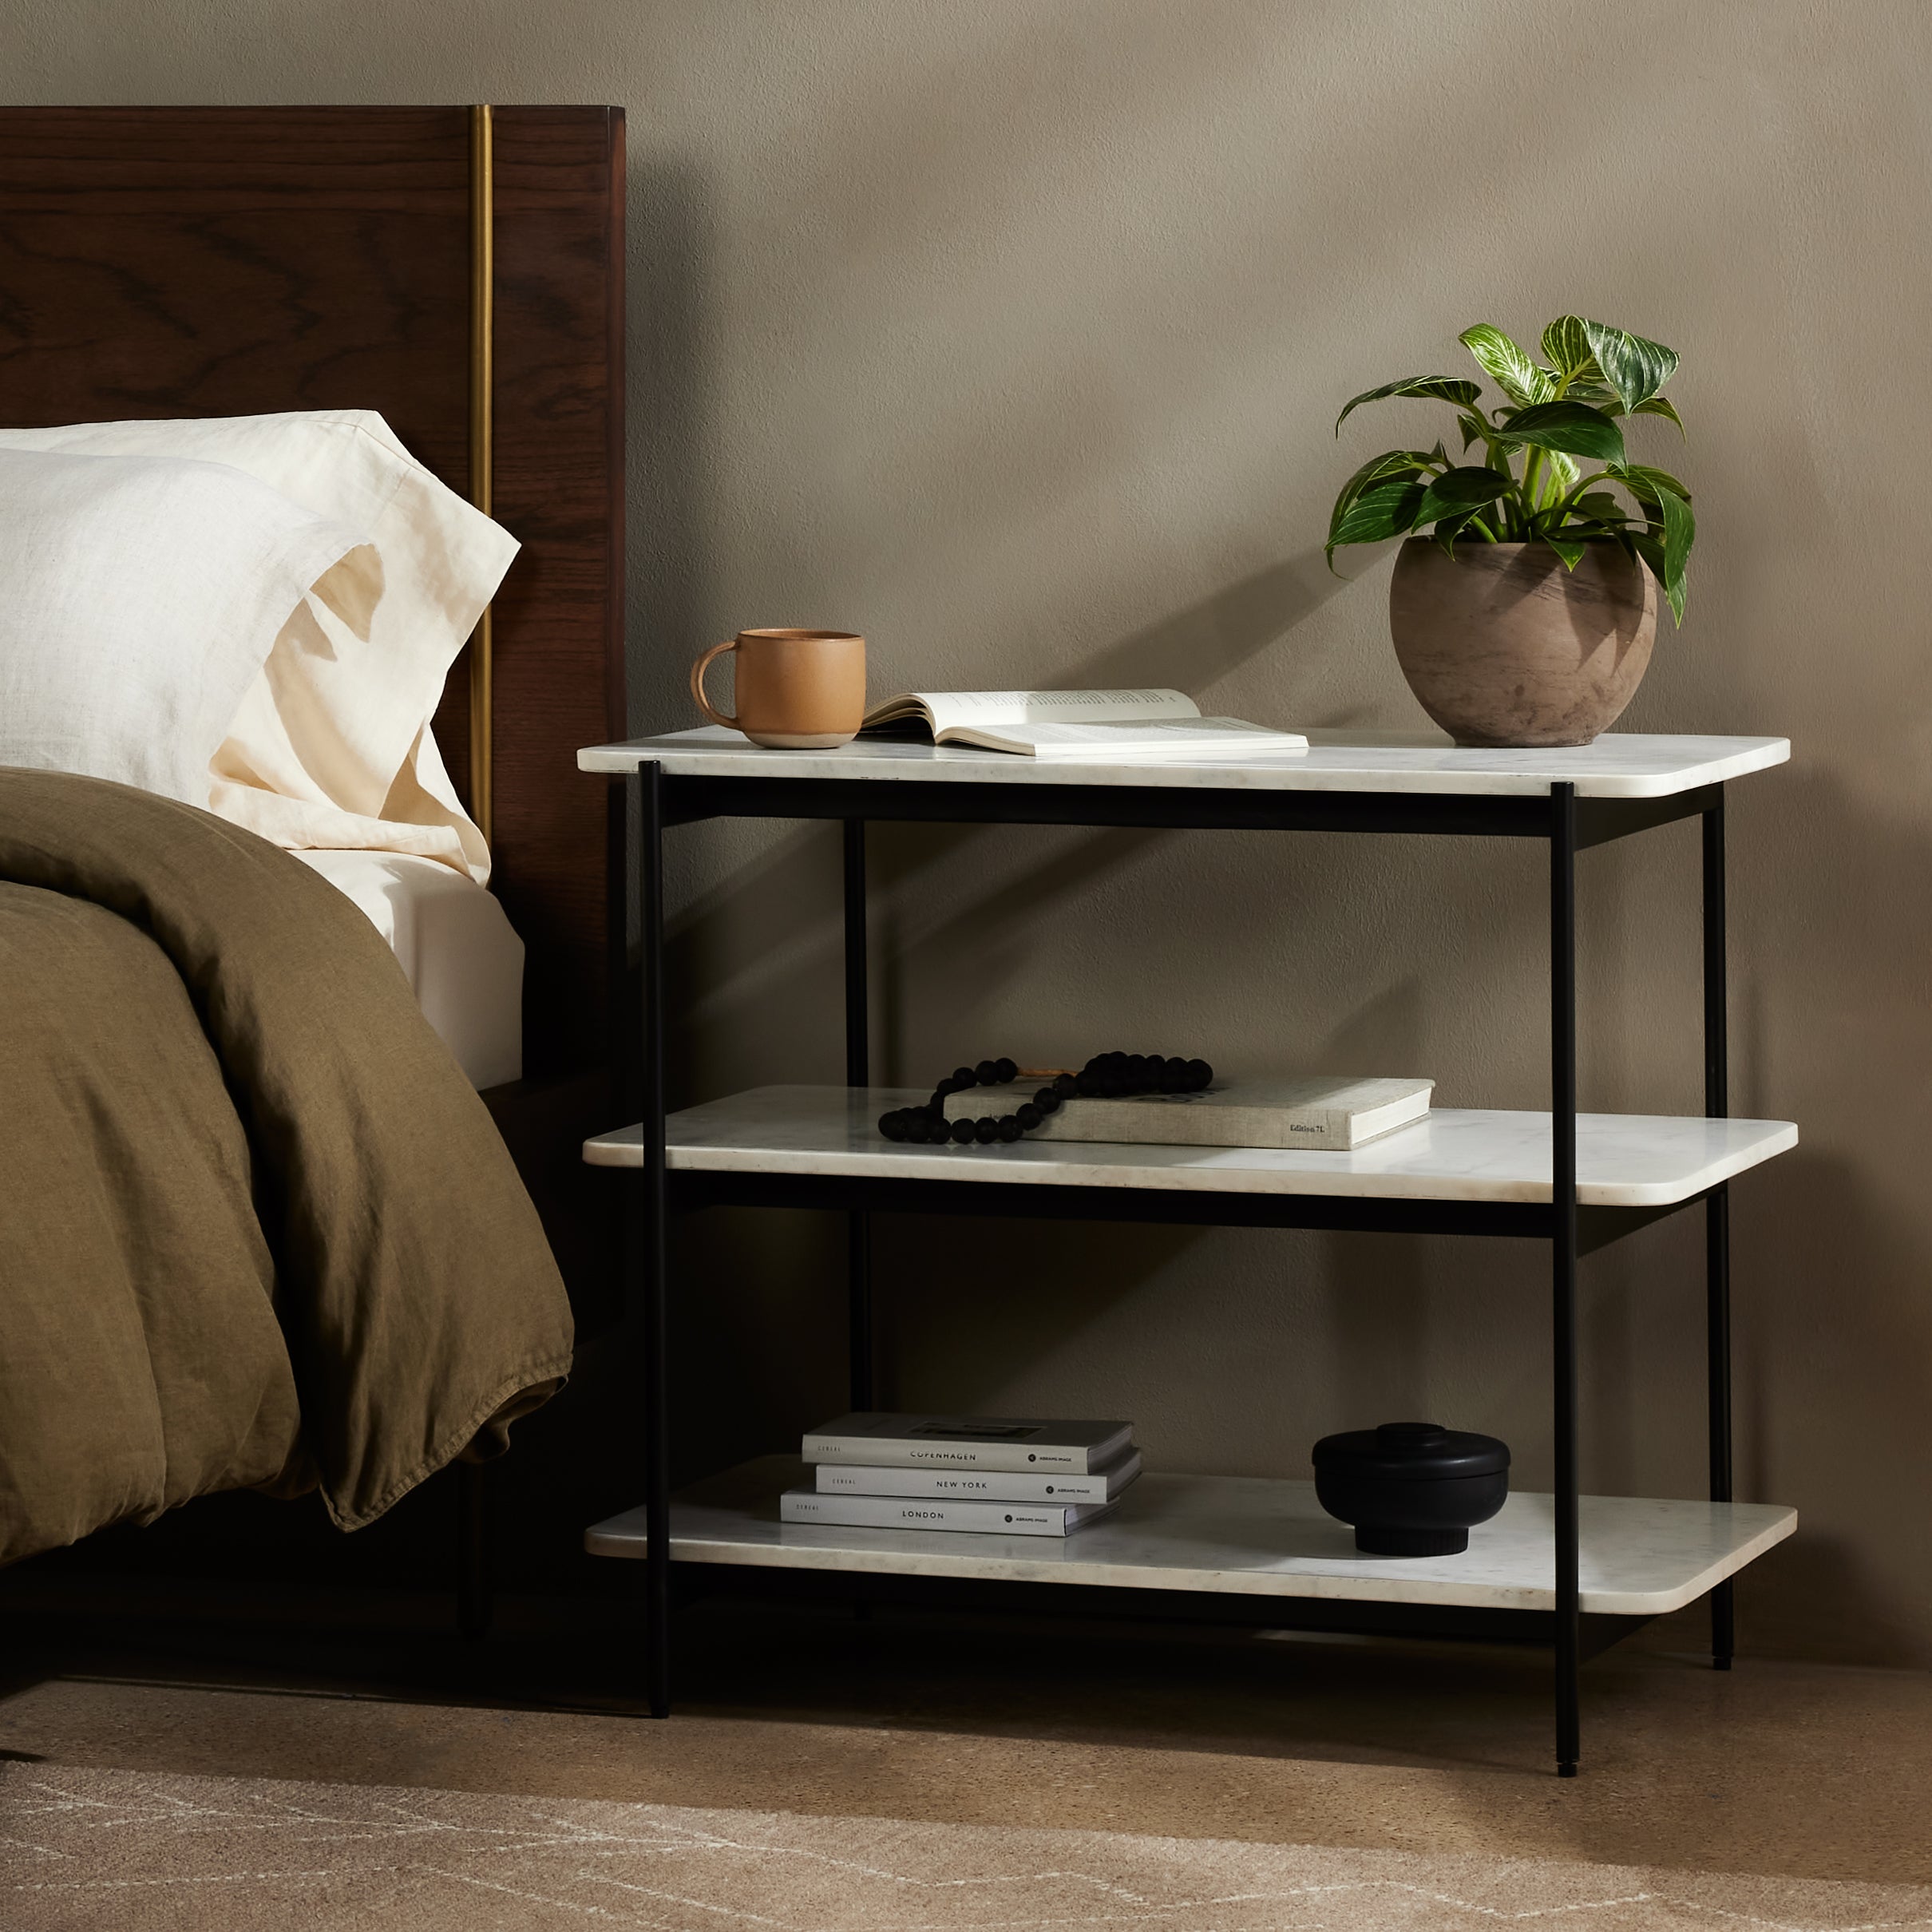 Jasper Nightstand is a black-finished iron that forms a slim, airy frame for open shelving of polished white marble. Amethyst Home provides interior design services, furniture, rugs, and lighting in the Calabasas metro area.